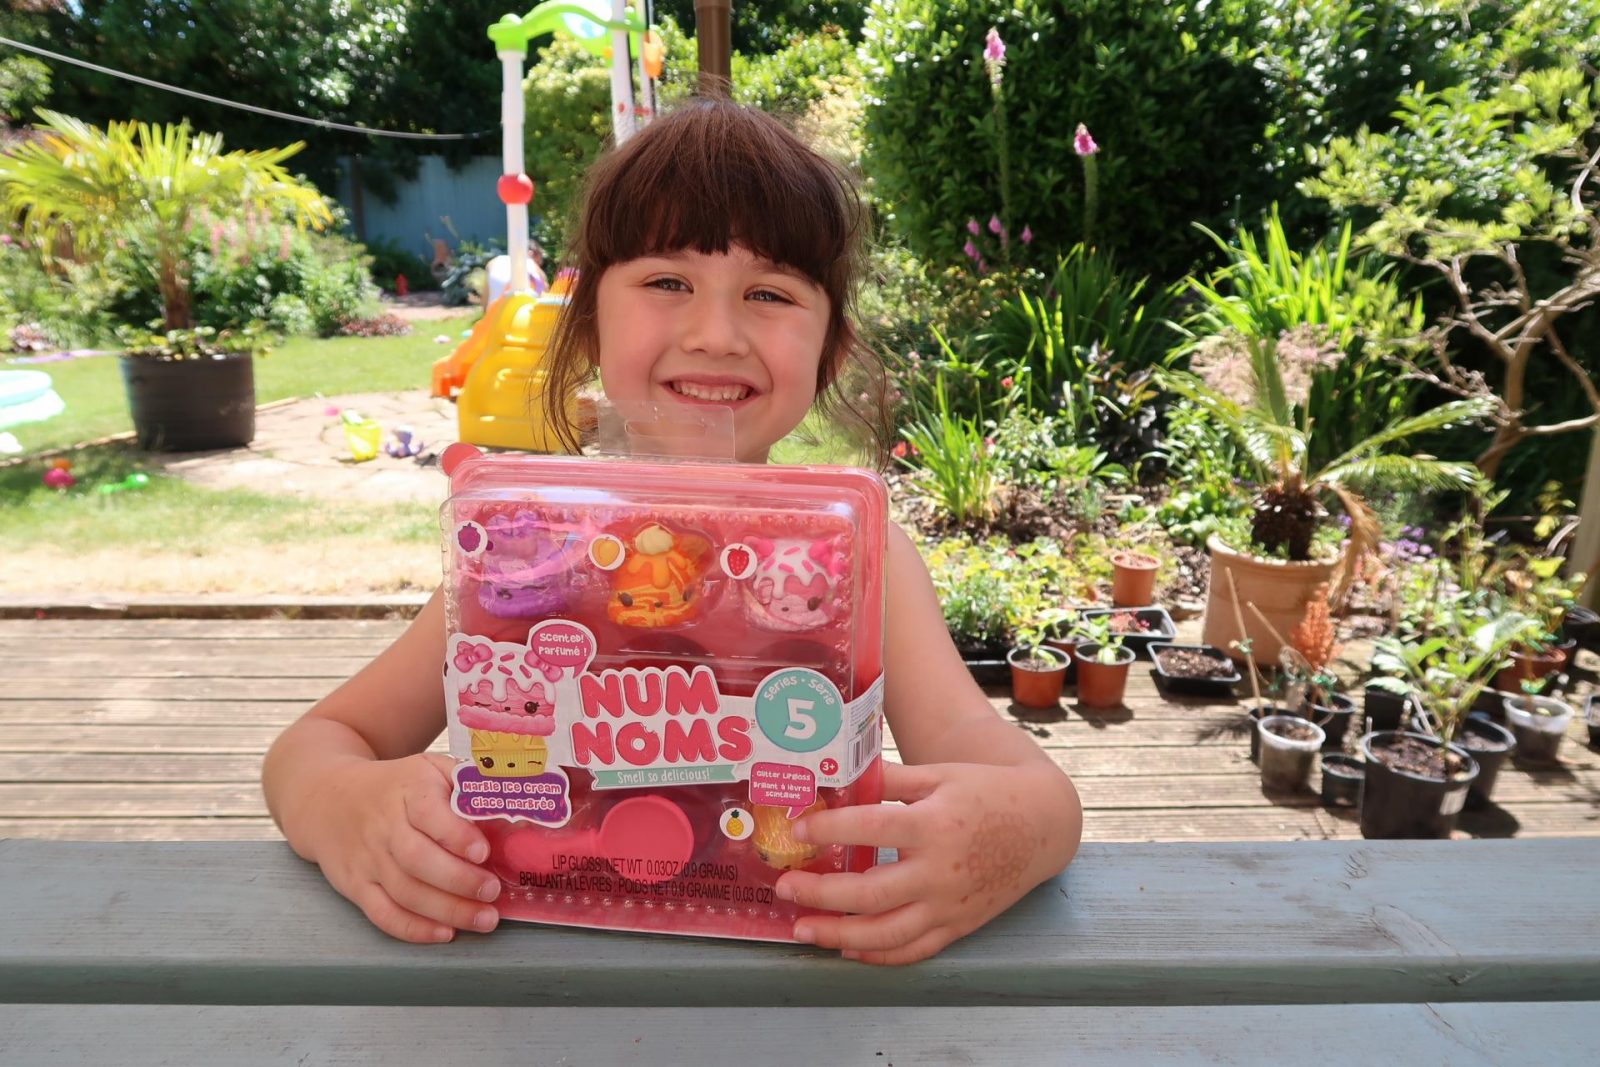 Num Noms Series 5 - REVIEW - our thoughts on the new series